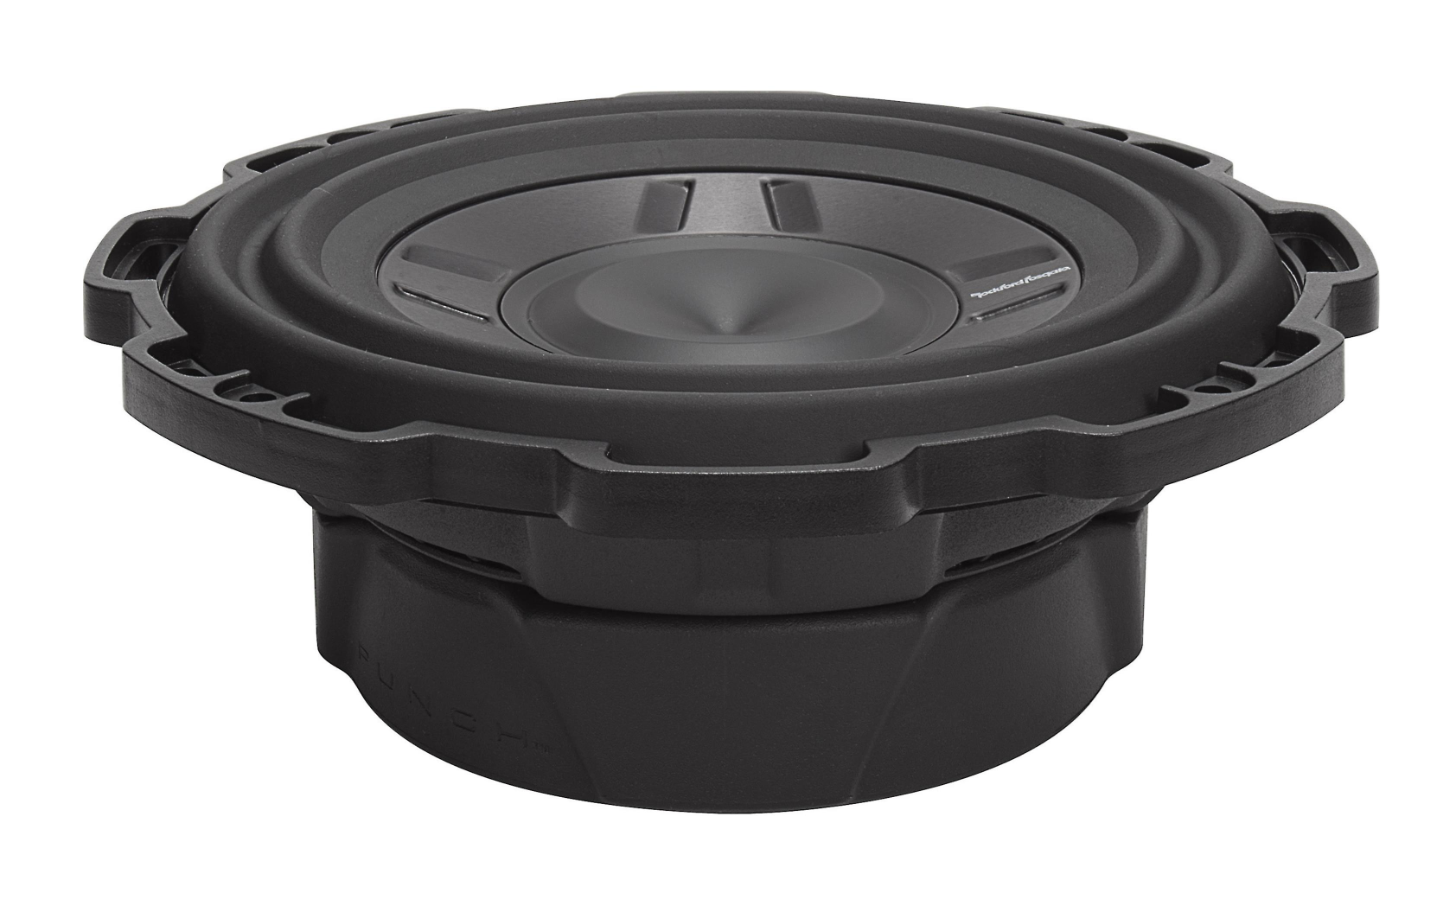 How To Know What Subwoofer To Get In Your Single Cab Truck